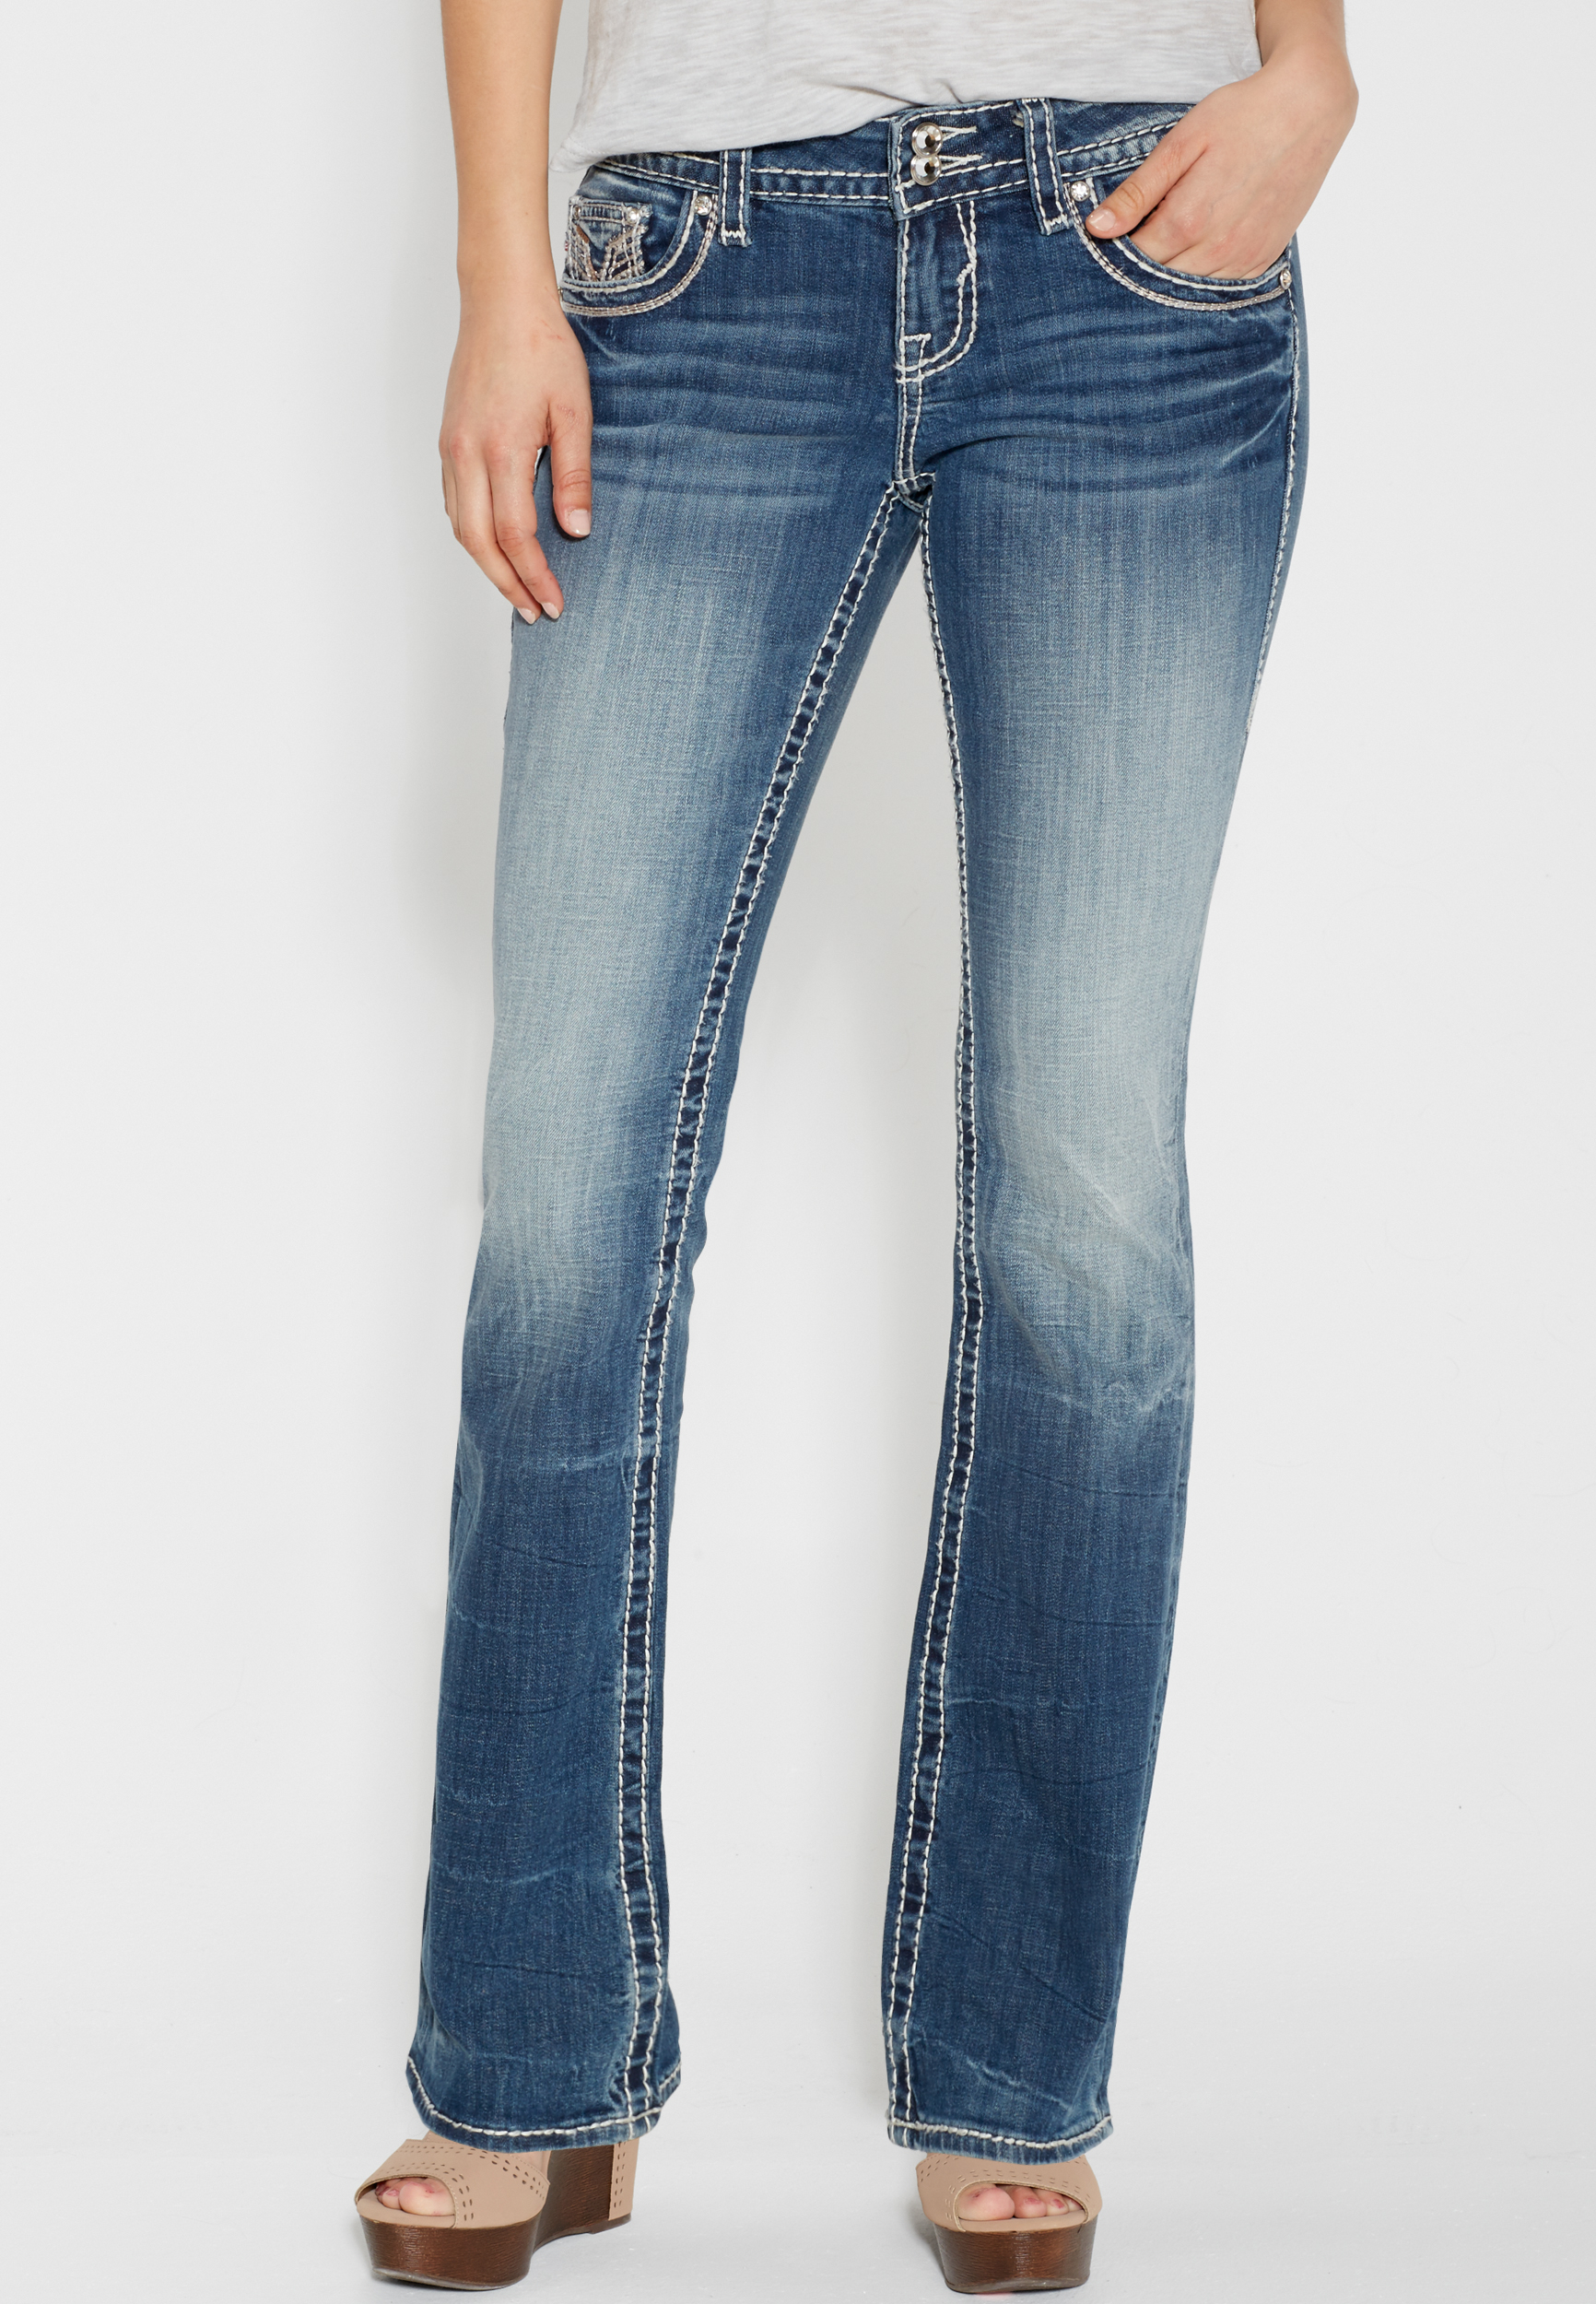 Vigoss® dark wash slim boot jeans with embellishments | maurices